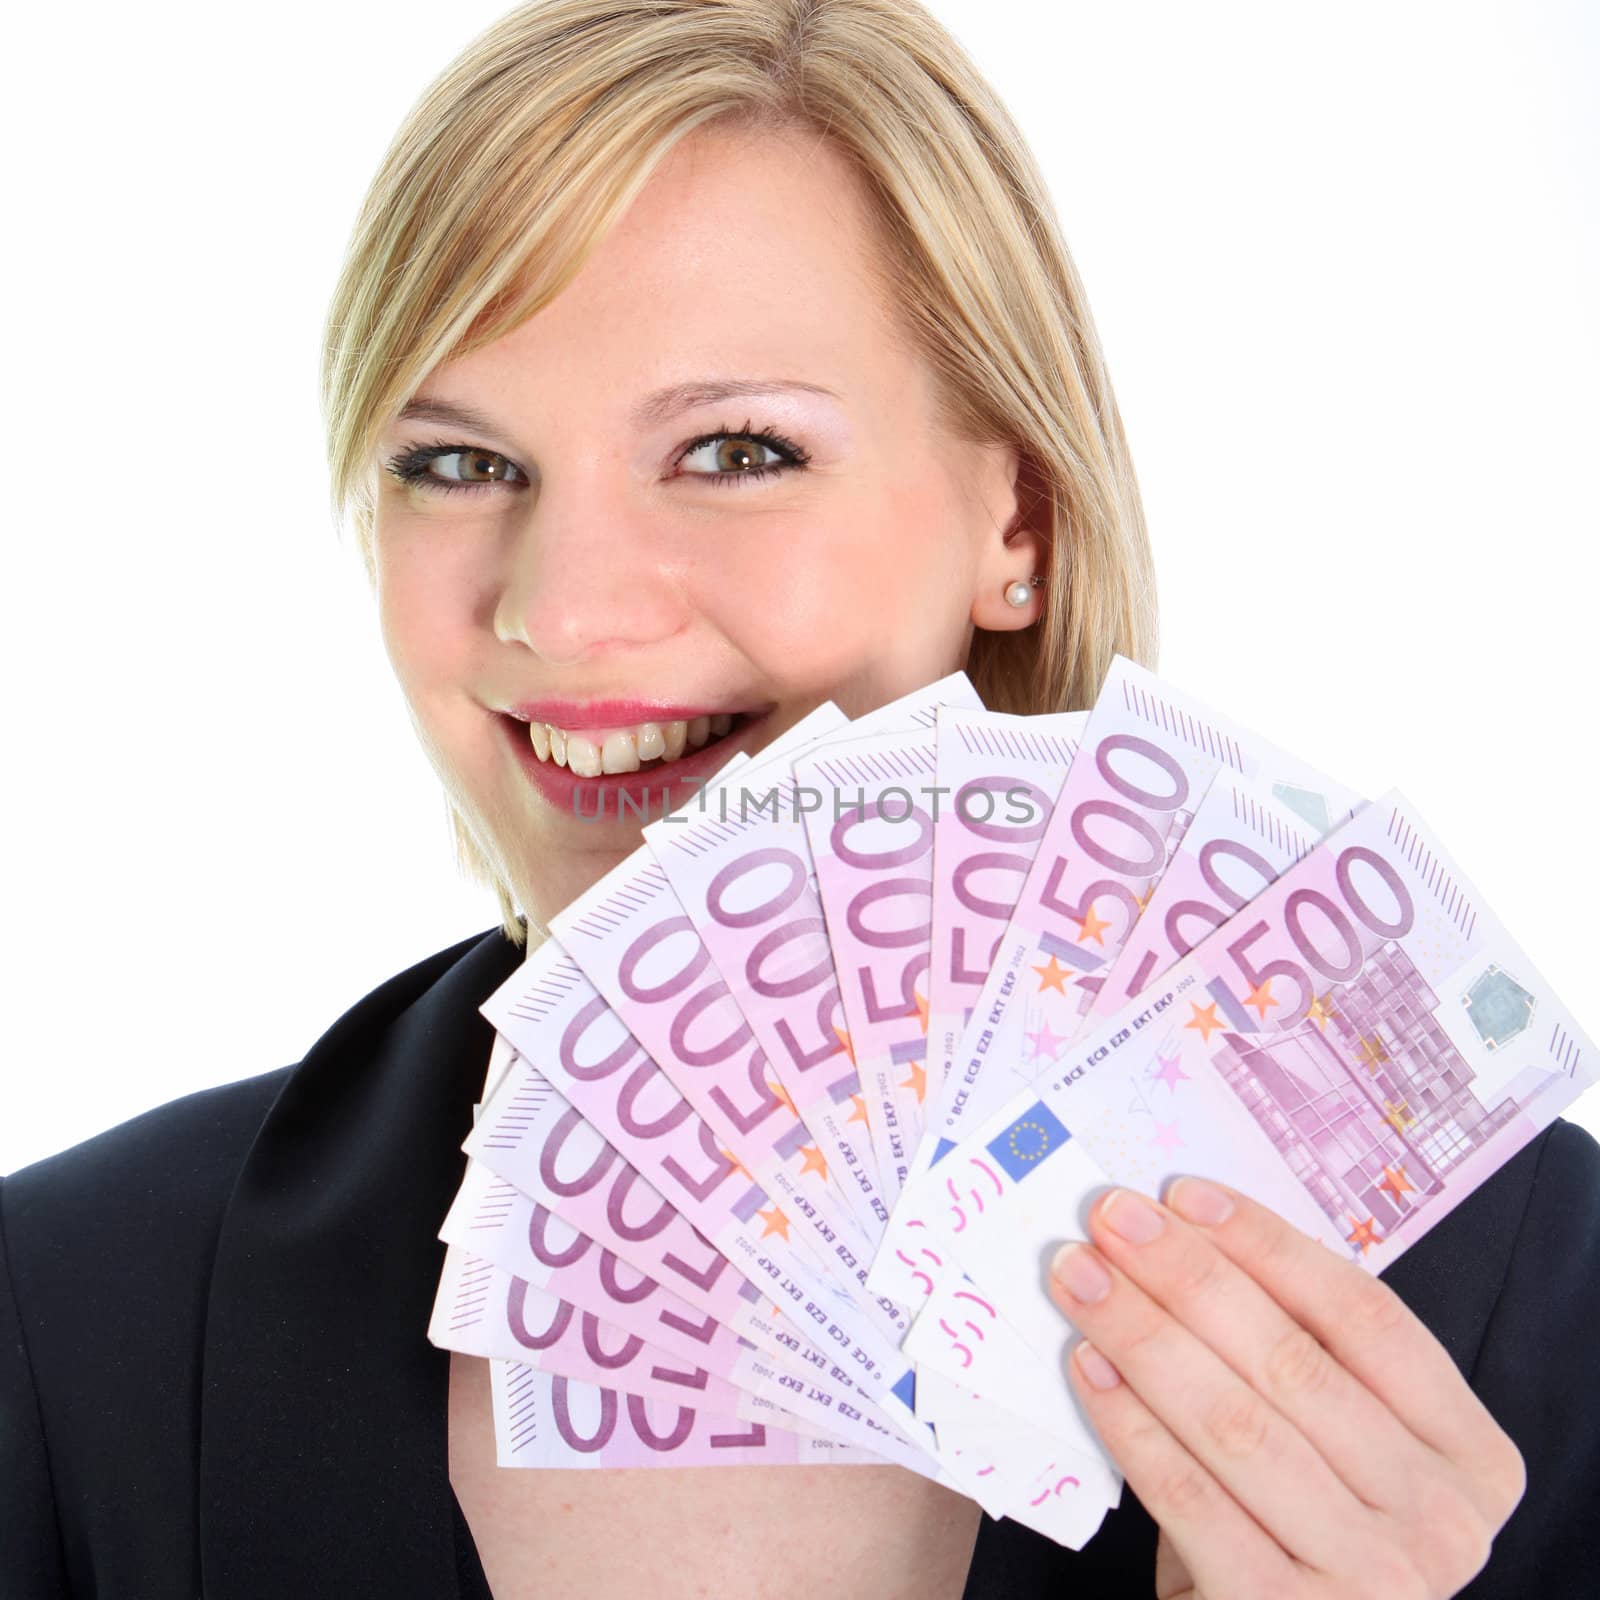 Smiling Blonde Woman Holding 500 Euro Notes by Farina6000